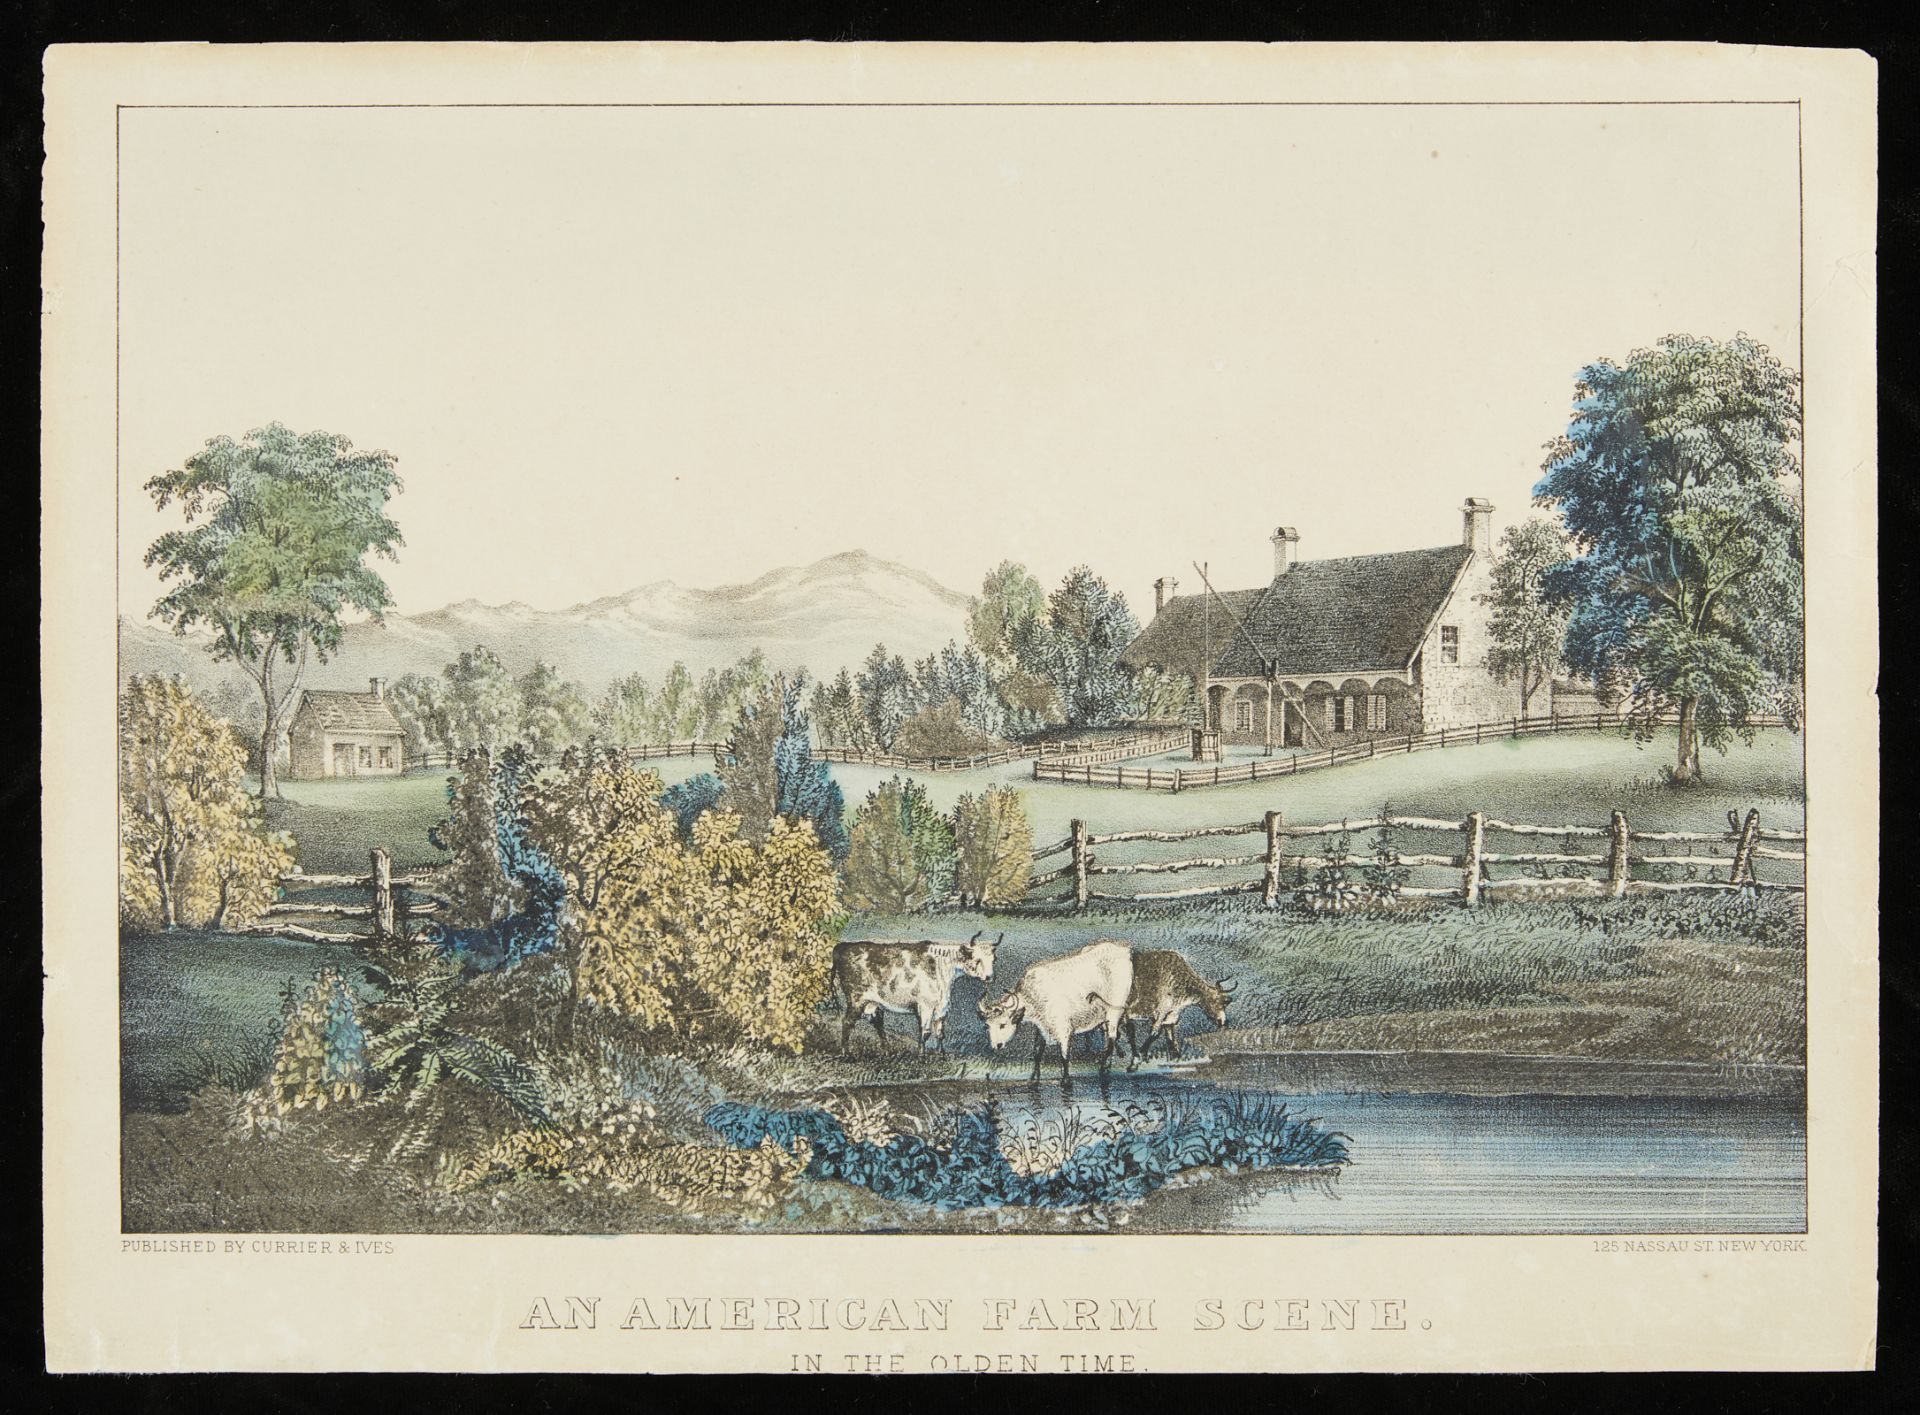 Currier & Ives "American Farm Scene: Olden Time" - Image 3 of 7